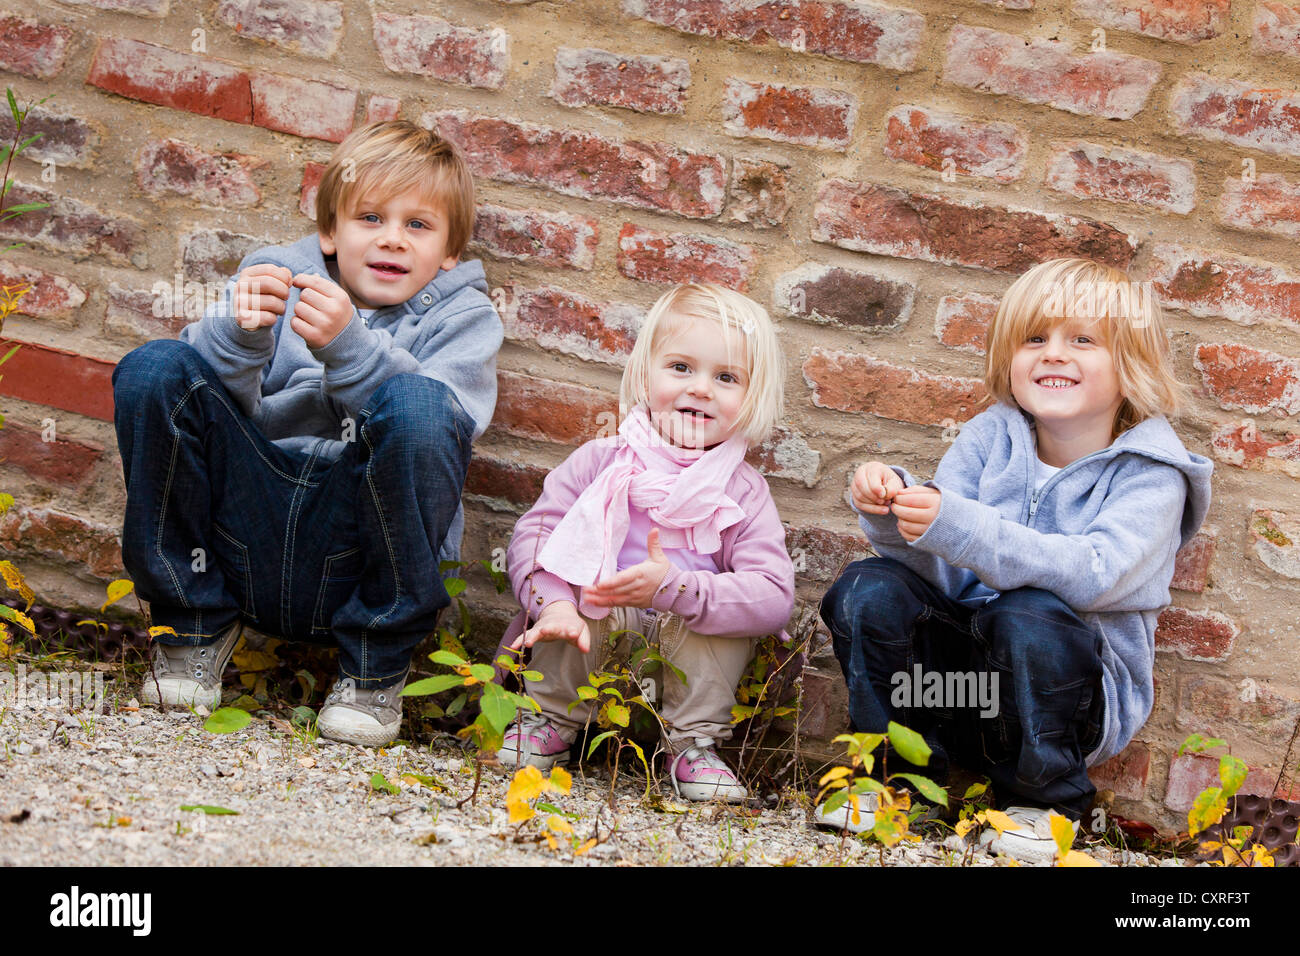 Siblings, 2, 5 and 7 years old, squatting in front of a brick wall Stock Photo